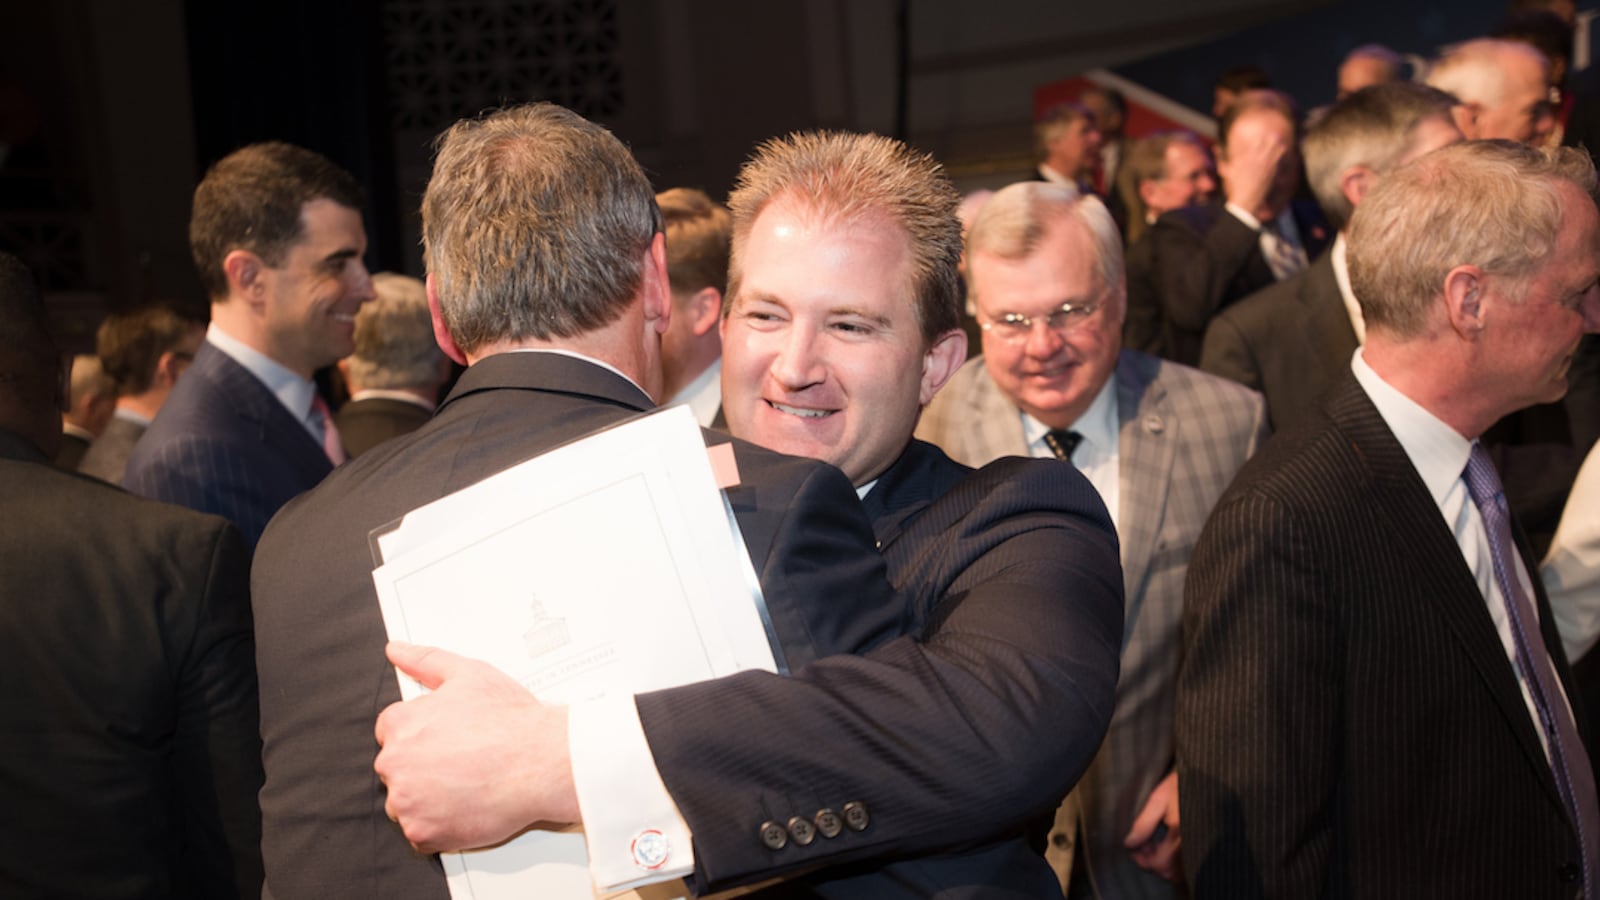 Two men wearing suits hug in the middle of a crowd.